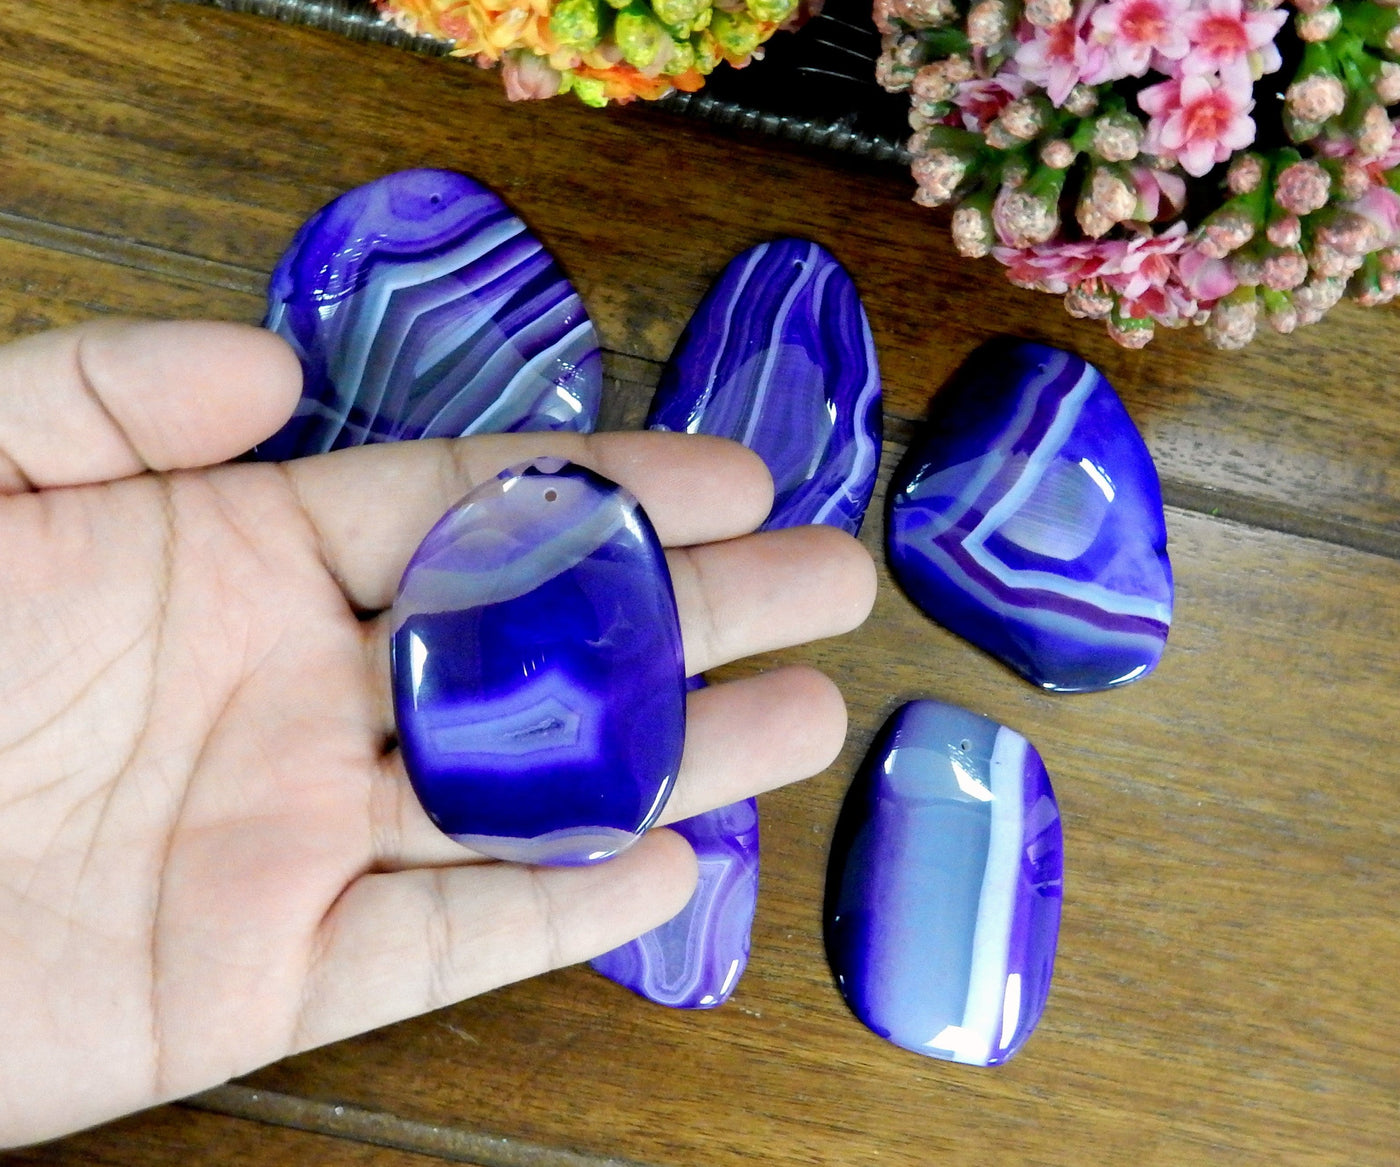 Purple Drilled Freeform Agate Slices With Polished Edge in Hand on Wooden Background.